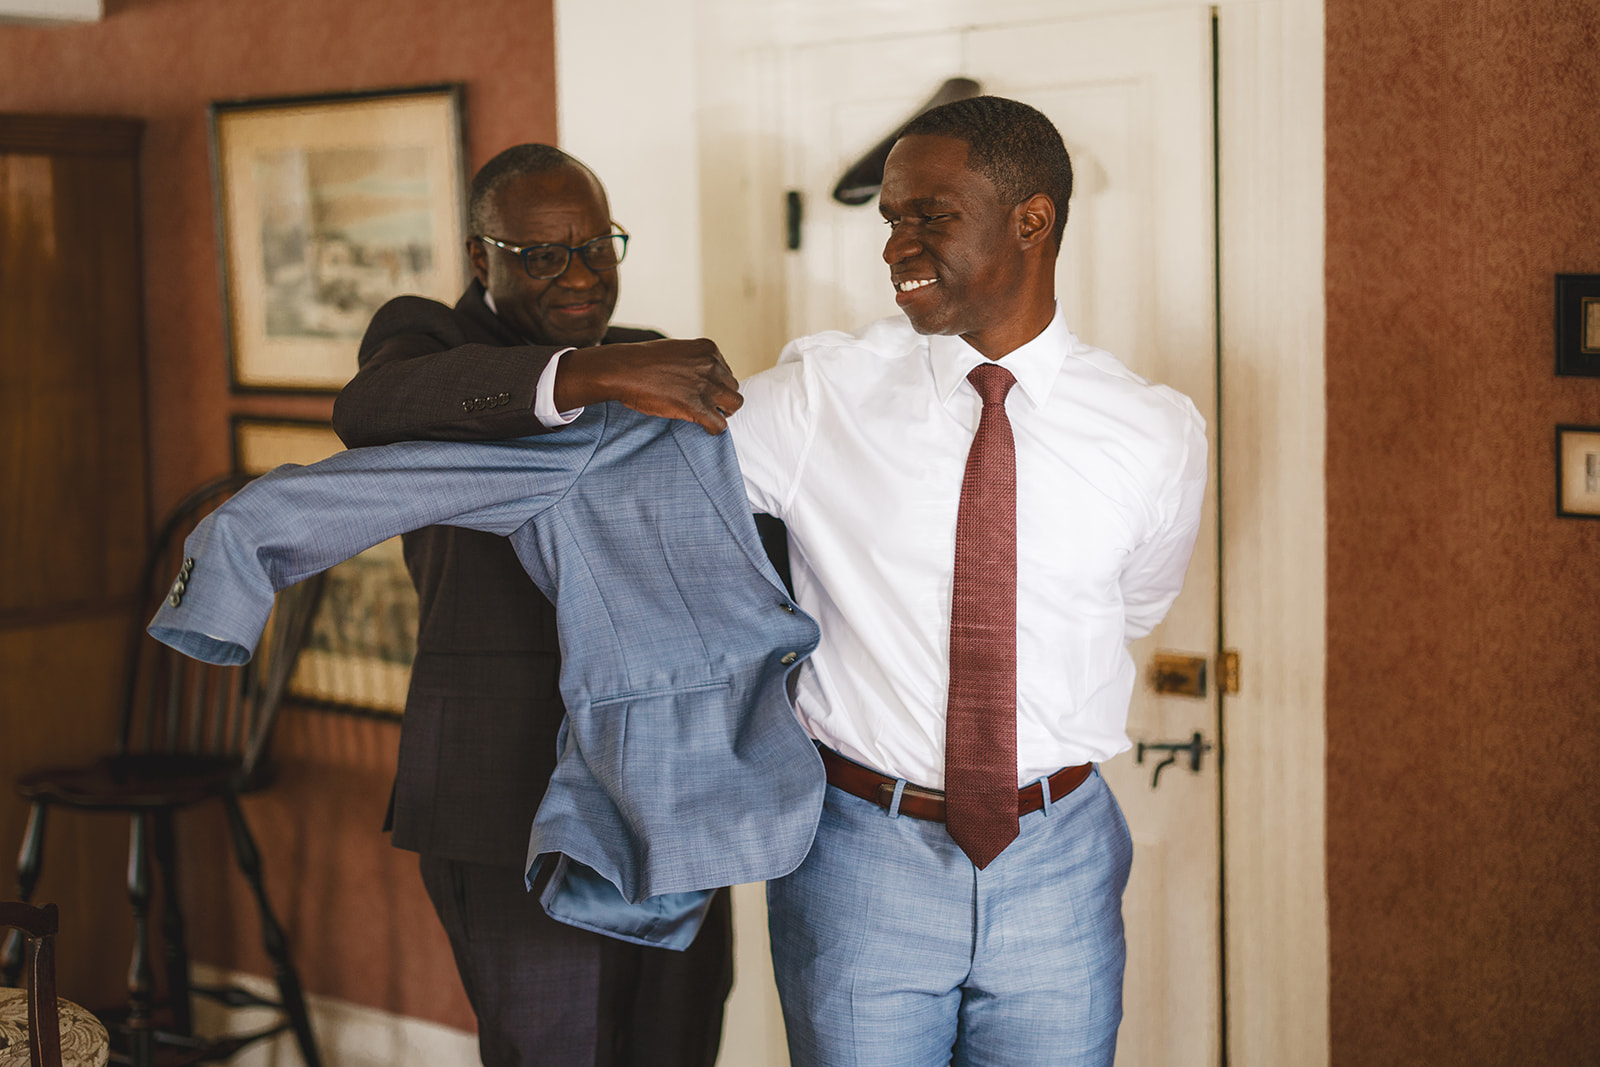 groom's father helps his son get ready for wedding by putting his jacket on